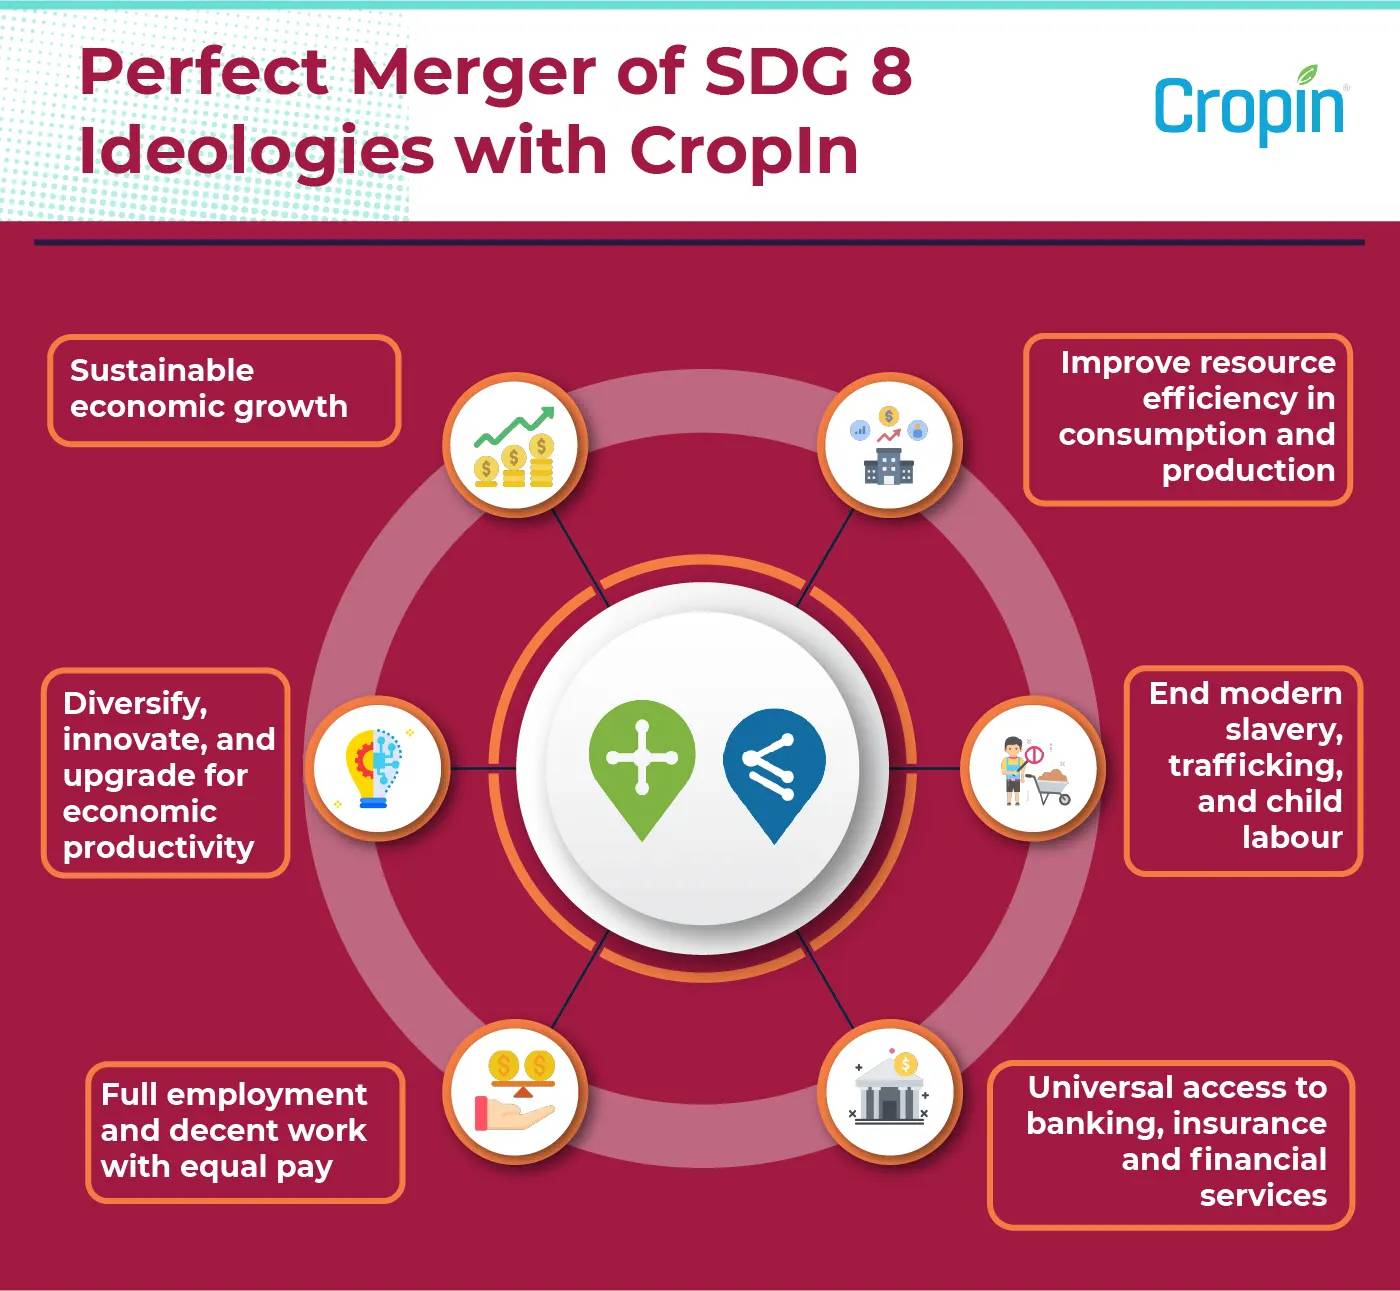 SDG8 Ideology with Cropin